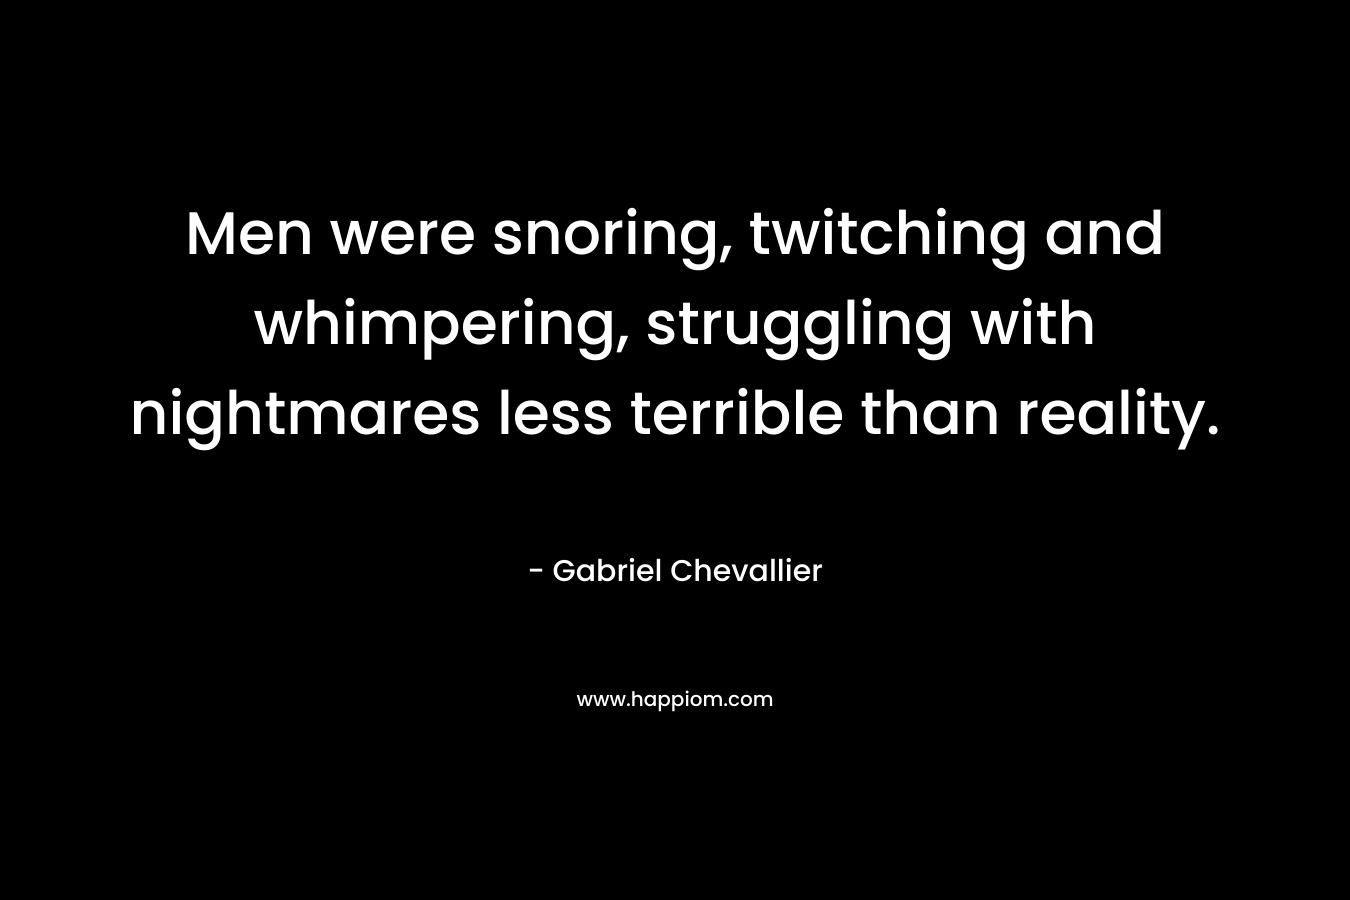 Men were snoring, twitching and whimpering, struggling with nightmares less terrible than reality. – Gabriel Chevallier